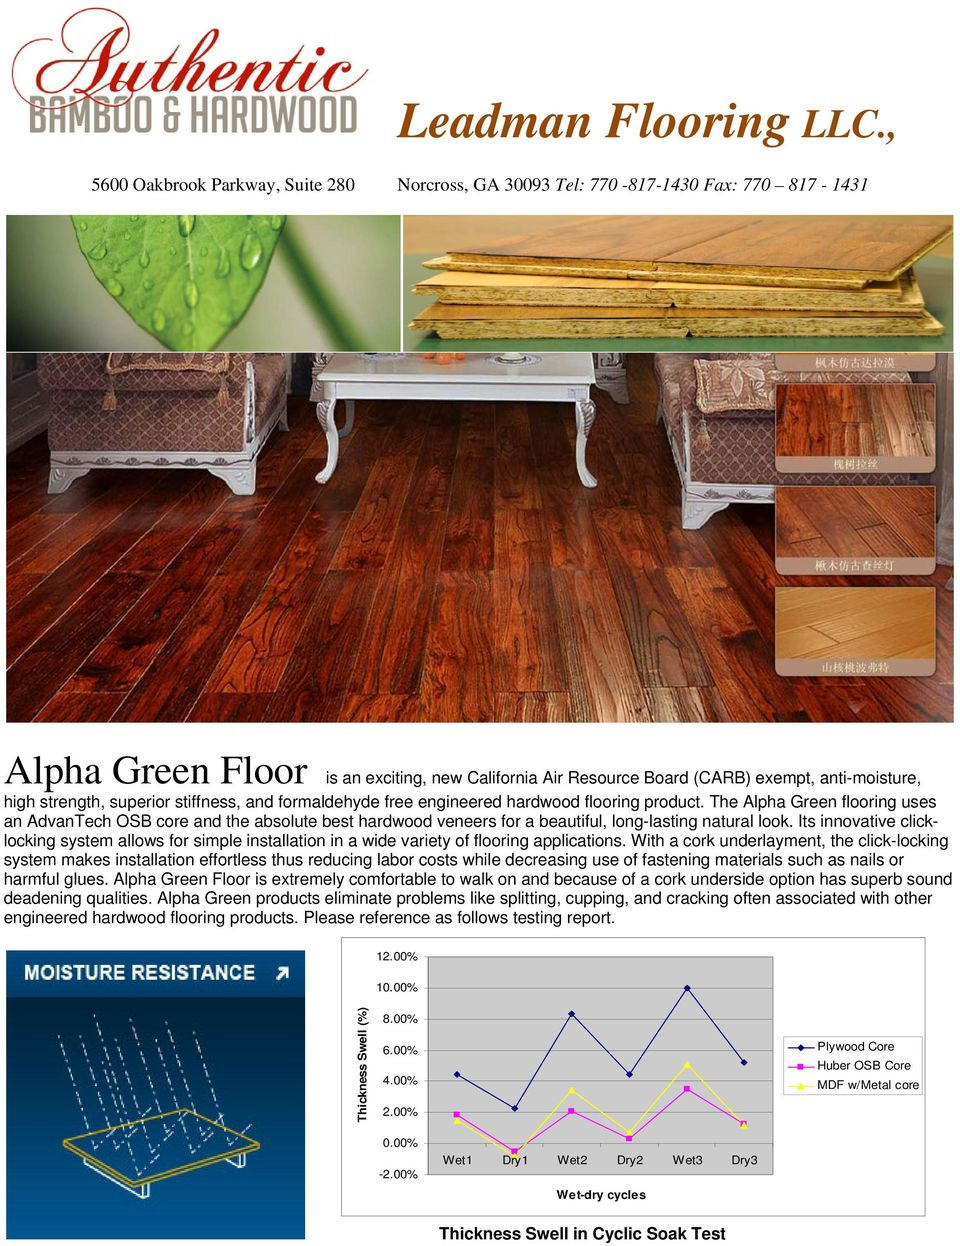 25 Perfect How to Make Wood Filler with Sawdust for Hardwood Floors 2024 free download how to make wood filler with sawdust for hardwood floors of leadman flooring llc pdf with regard to strength superior stiffness and formaldehyde free engineered hardwood flooring product